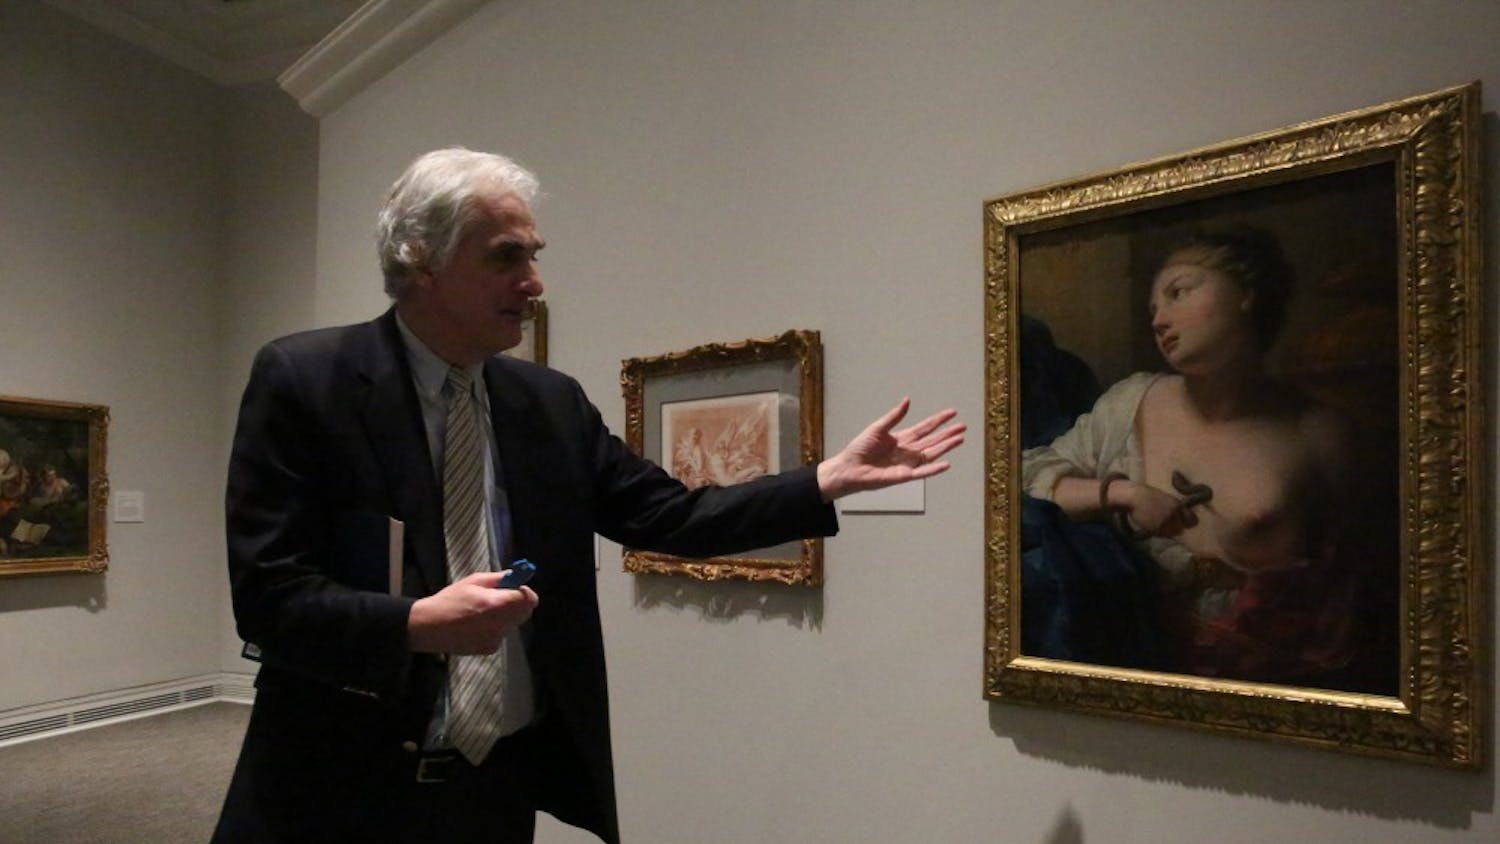 Peter Nisbet, Deputy Director of Curatorial Affairs at the Ackland Art Museum, discusses the meaning of a painting in the Becoming a Woman in the Age of Enlightenment exhibit.